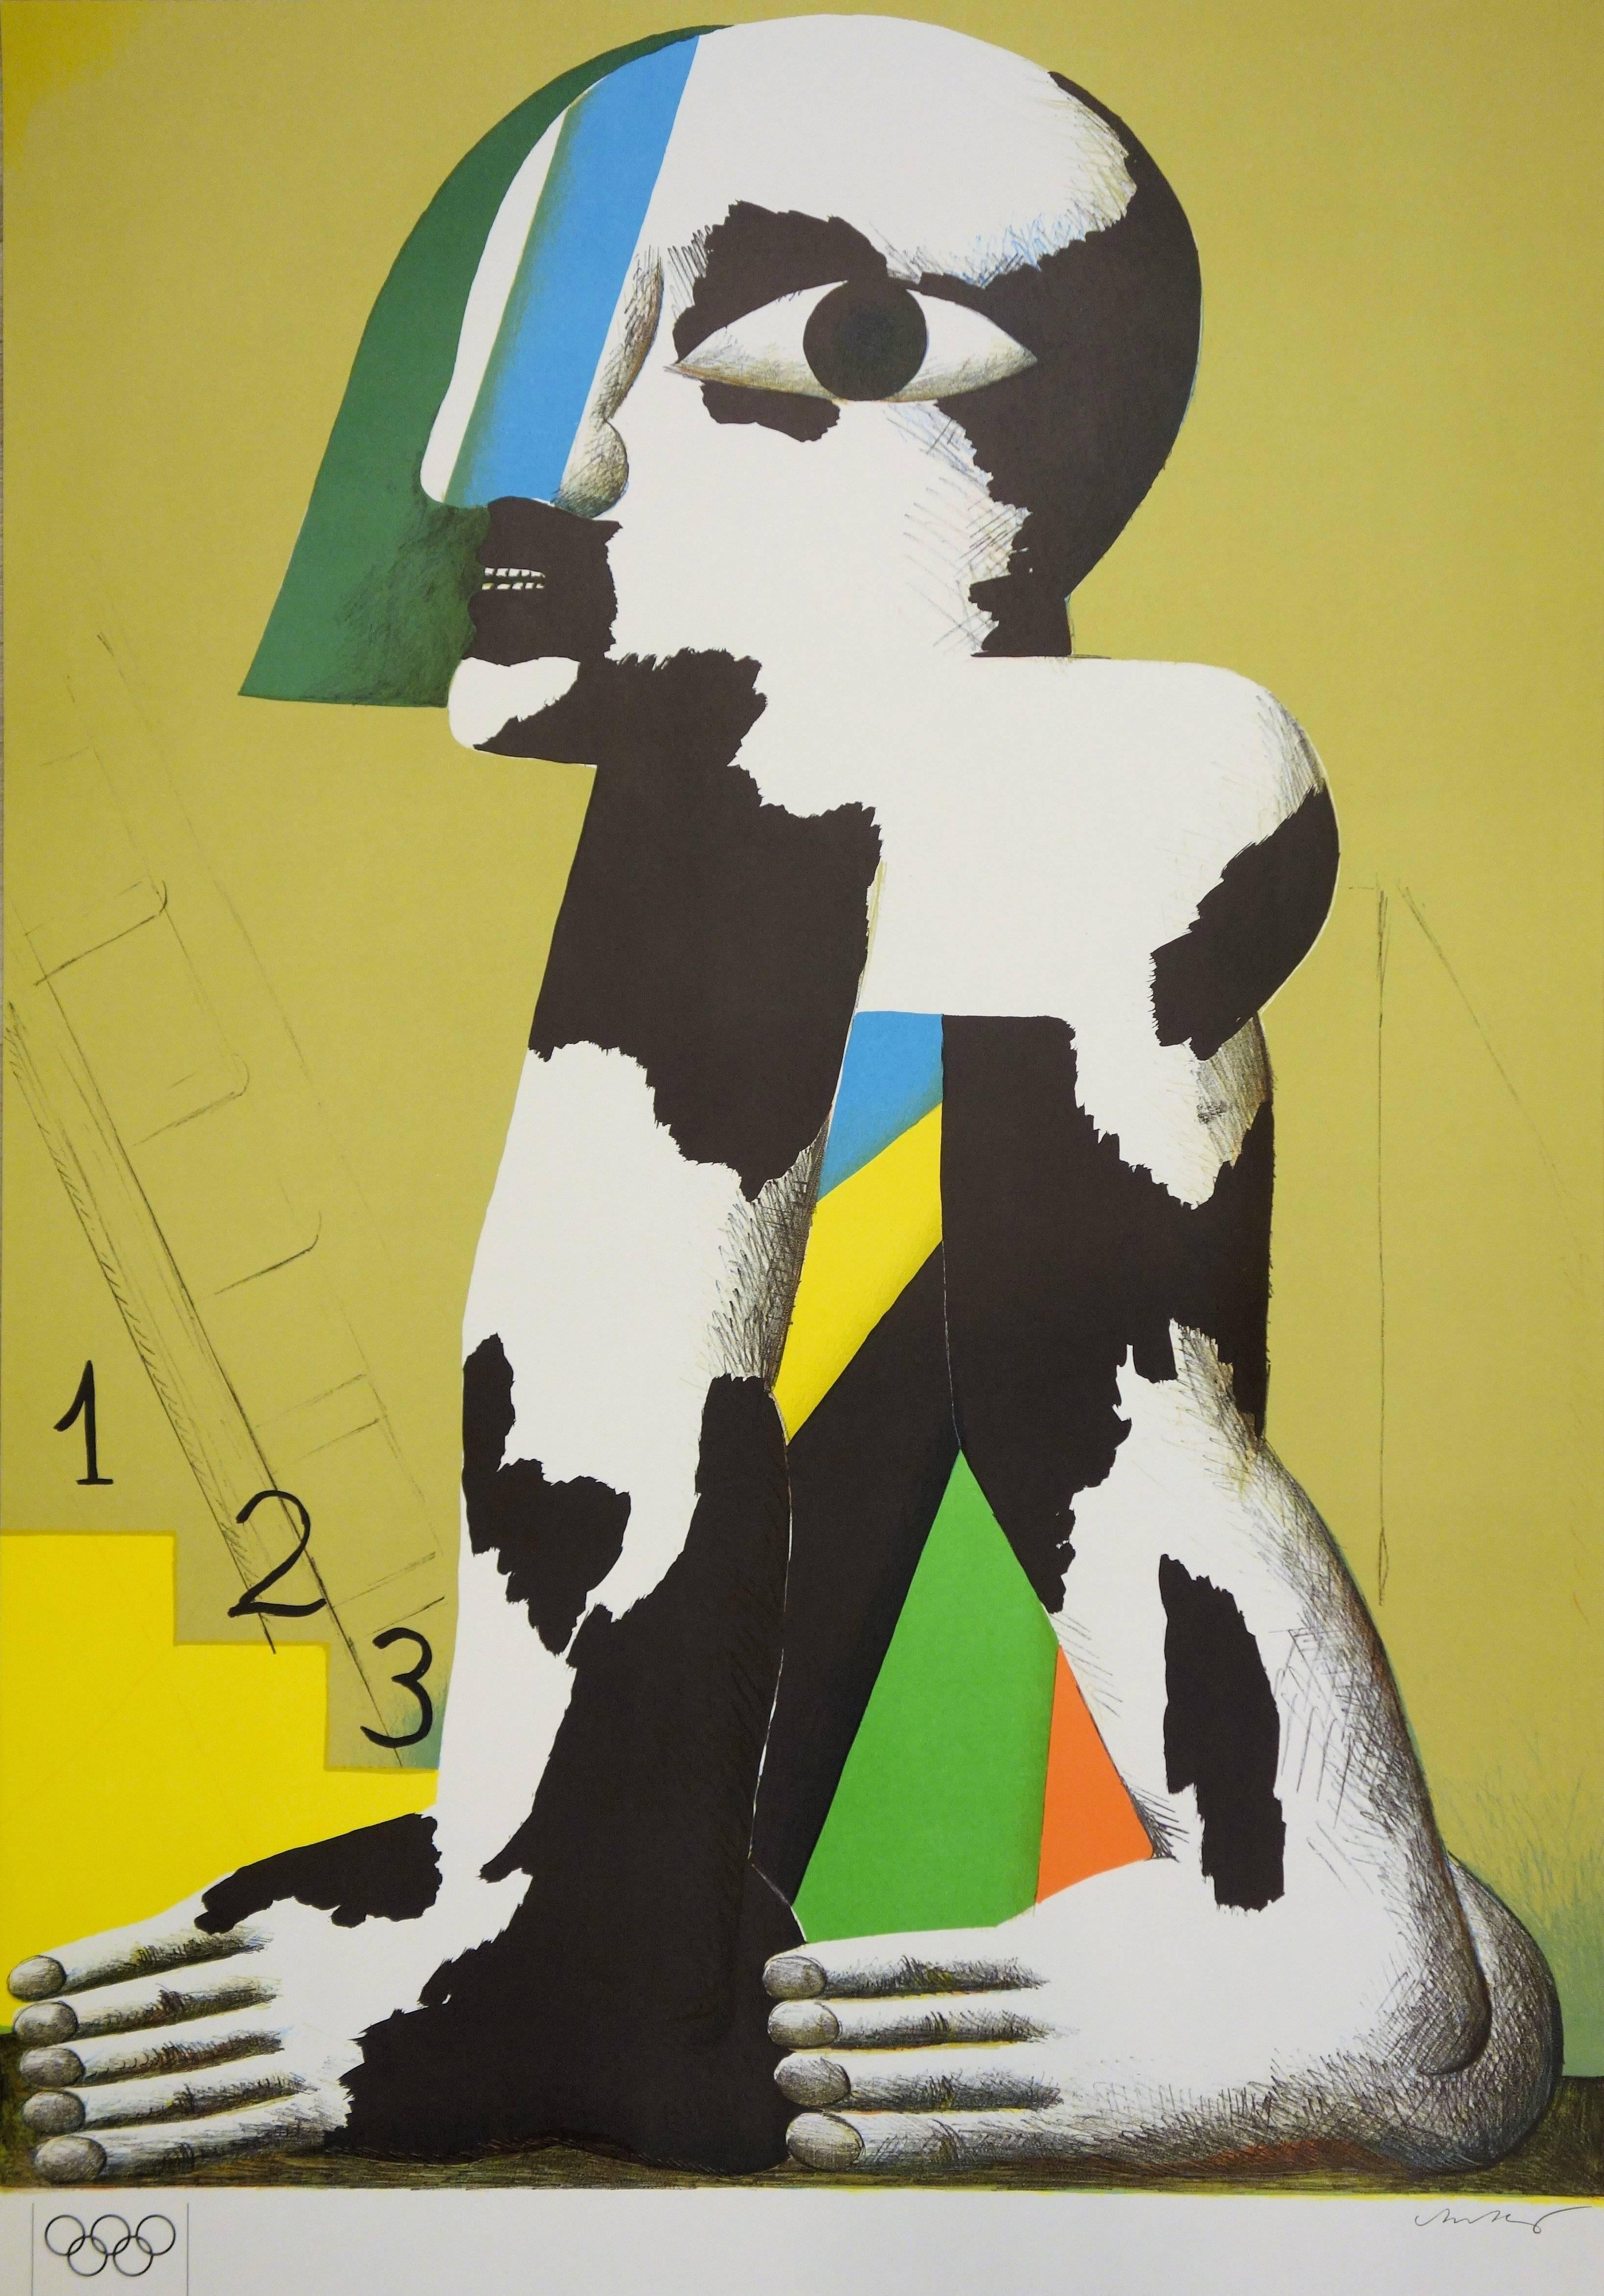 Sport : At the Foot of the Podium - Lithograph (Olympic Games Munich 1972) - Abstract Print by Horst Antes